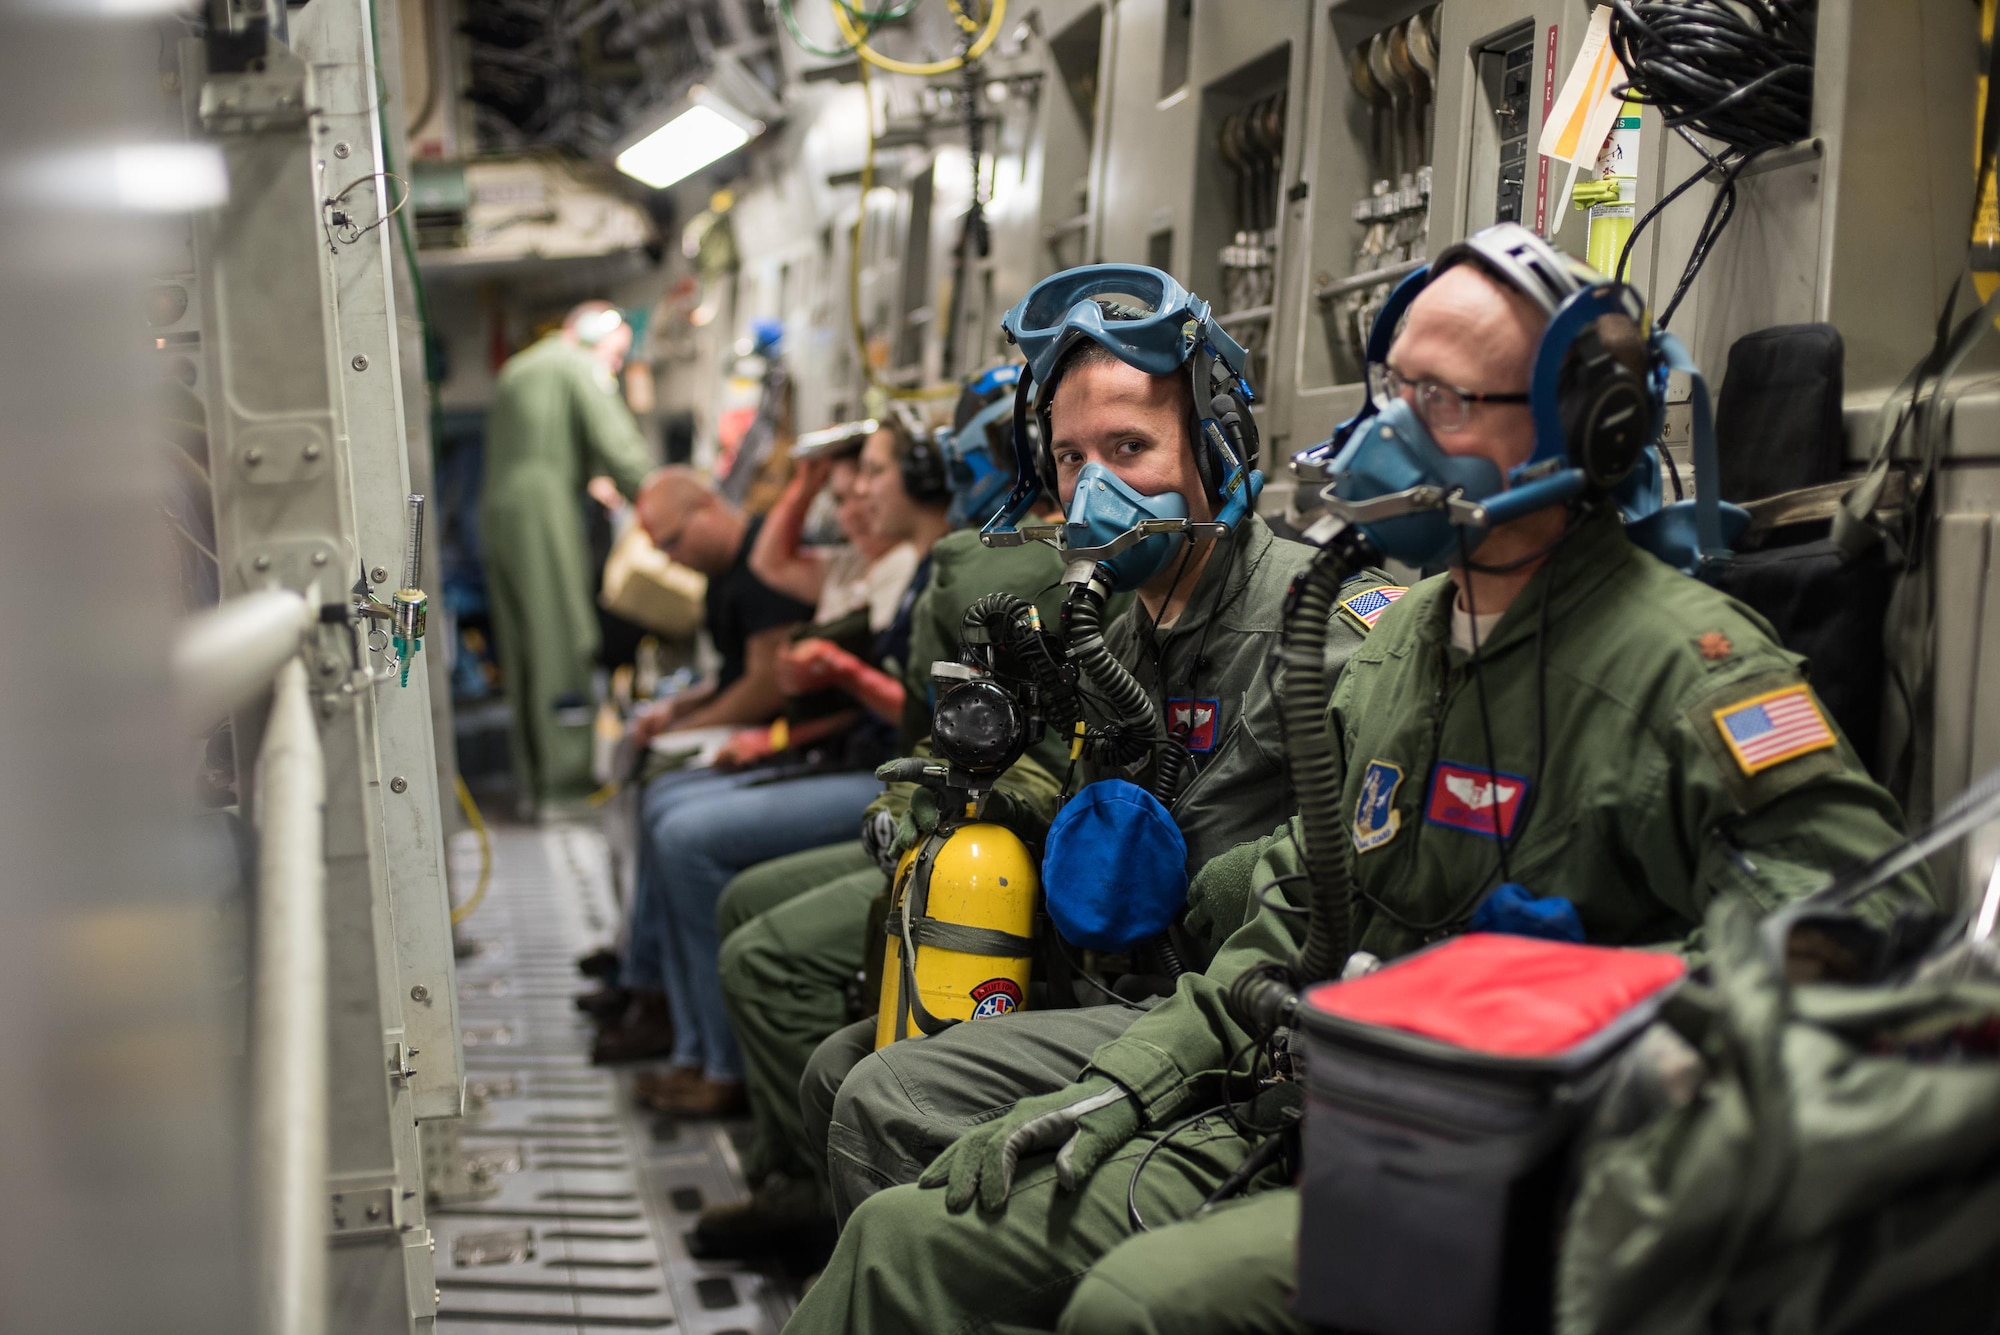 Capt. Sam Lingle (left), flight nurse, and Maj. Jeff Barley (right), medical crew director, both from the 137th Aeromedical Evacuation Squadron at Will Rogers Air National Guard Base, Oklahoma City, don oxygen masks during a simulated in-flight emergency while transporting patients aboard a C-17 Globemaster III from the 105th Airlift Wing, Steward Stewart Air National Guard Base, N.Y., en route to Altus Air Force Base, Altus, Okla., Oct. 30, 2017. The flight was part of a wildfire scenario during Vigilant Guard, a North American Command-sponsored, state-wide emergency response exercise held Oct. 30 to Nov. 2, 2017. (U.S. Air National Guard photo by Staff Sgt. Kasey M. Phipps)